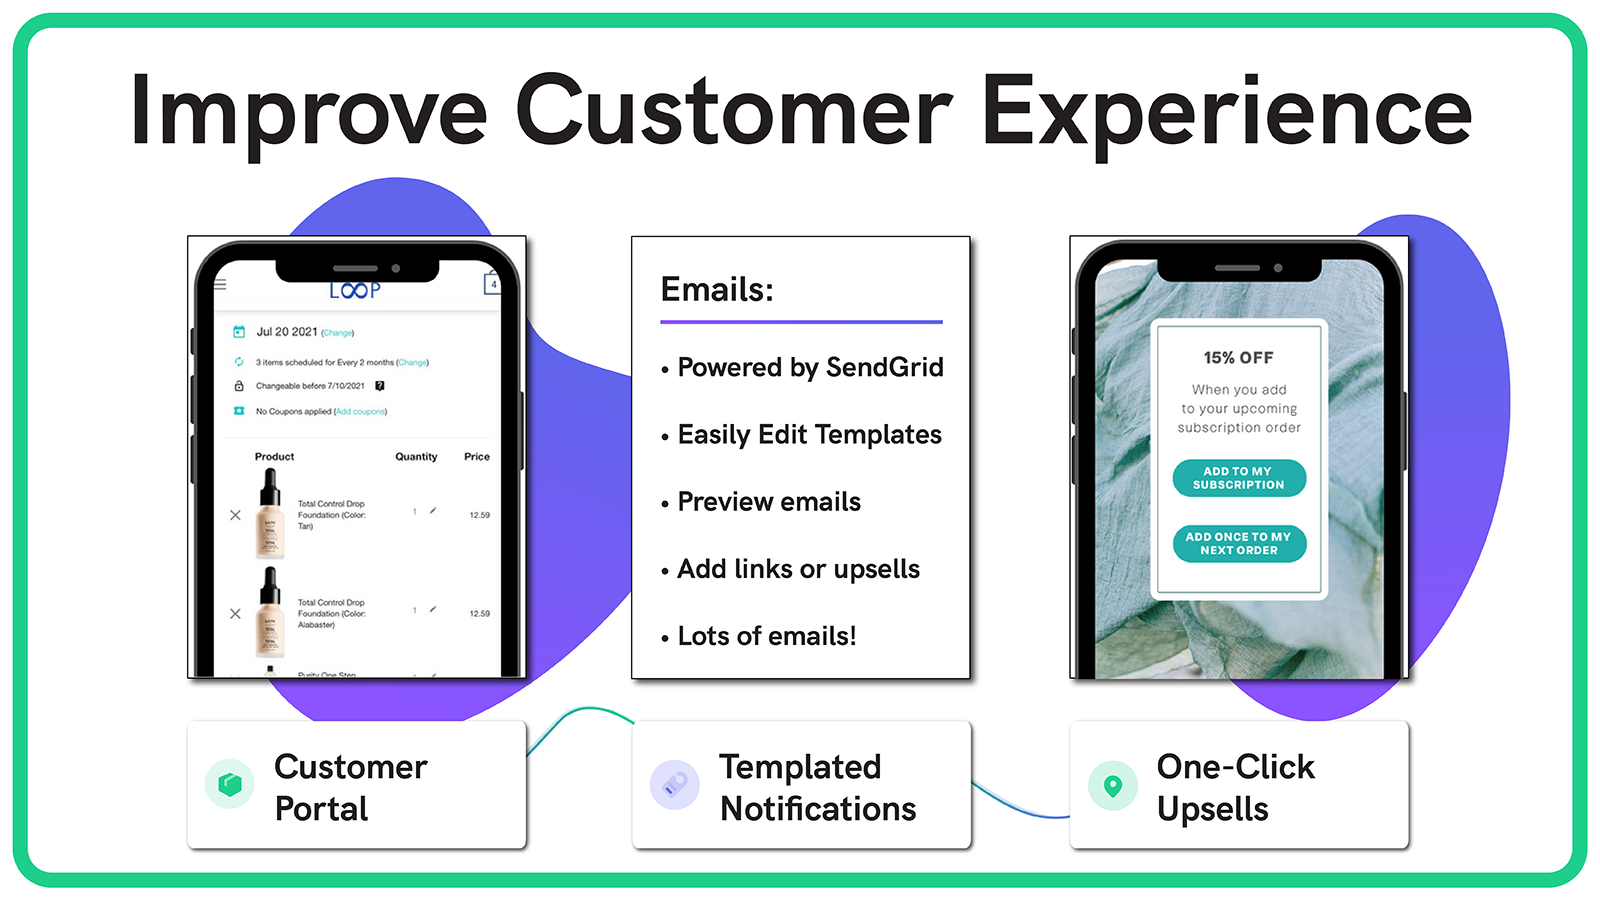 Improve Customer Experience on Subscriptions